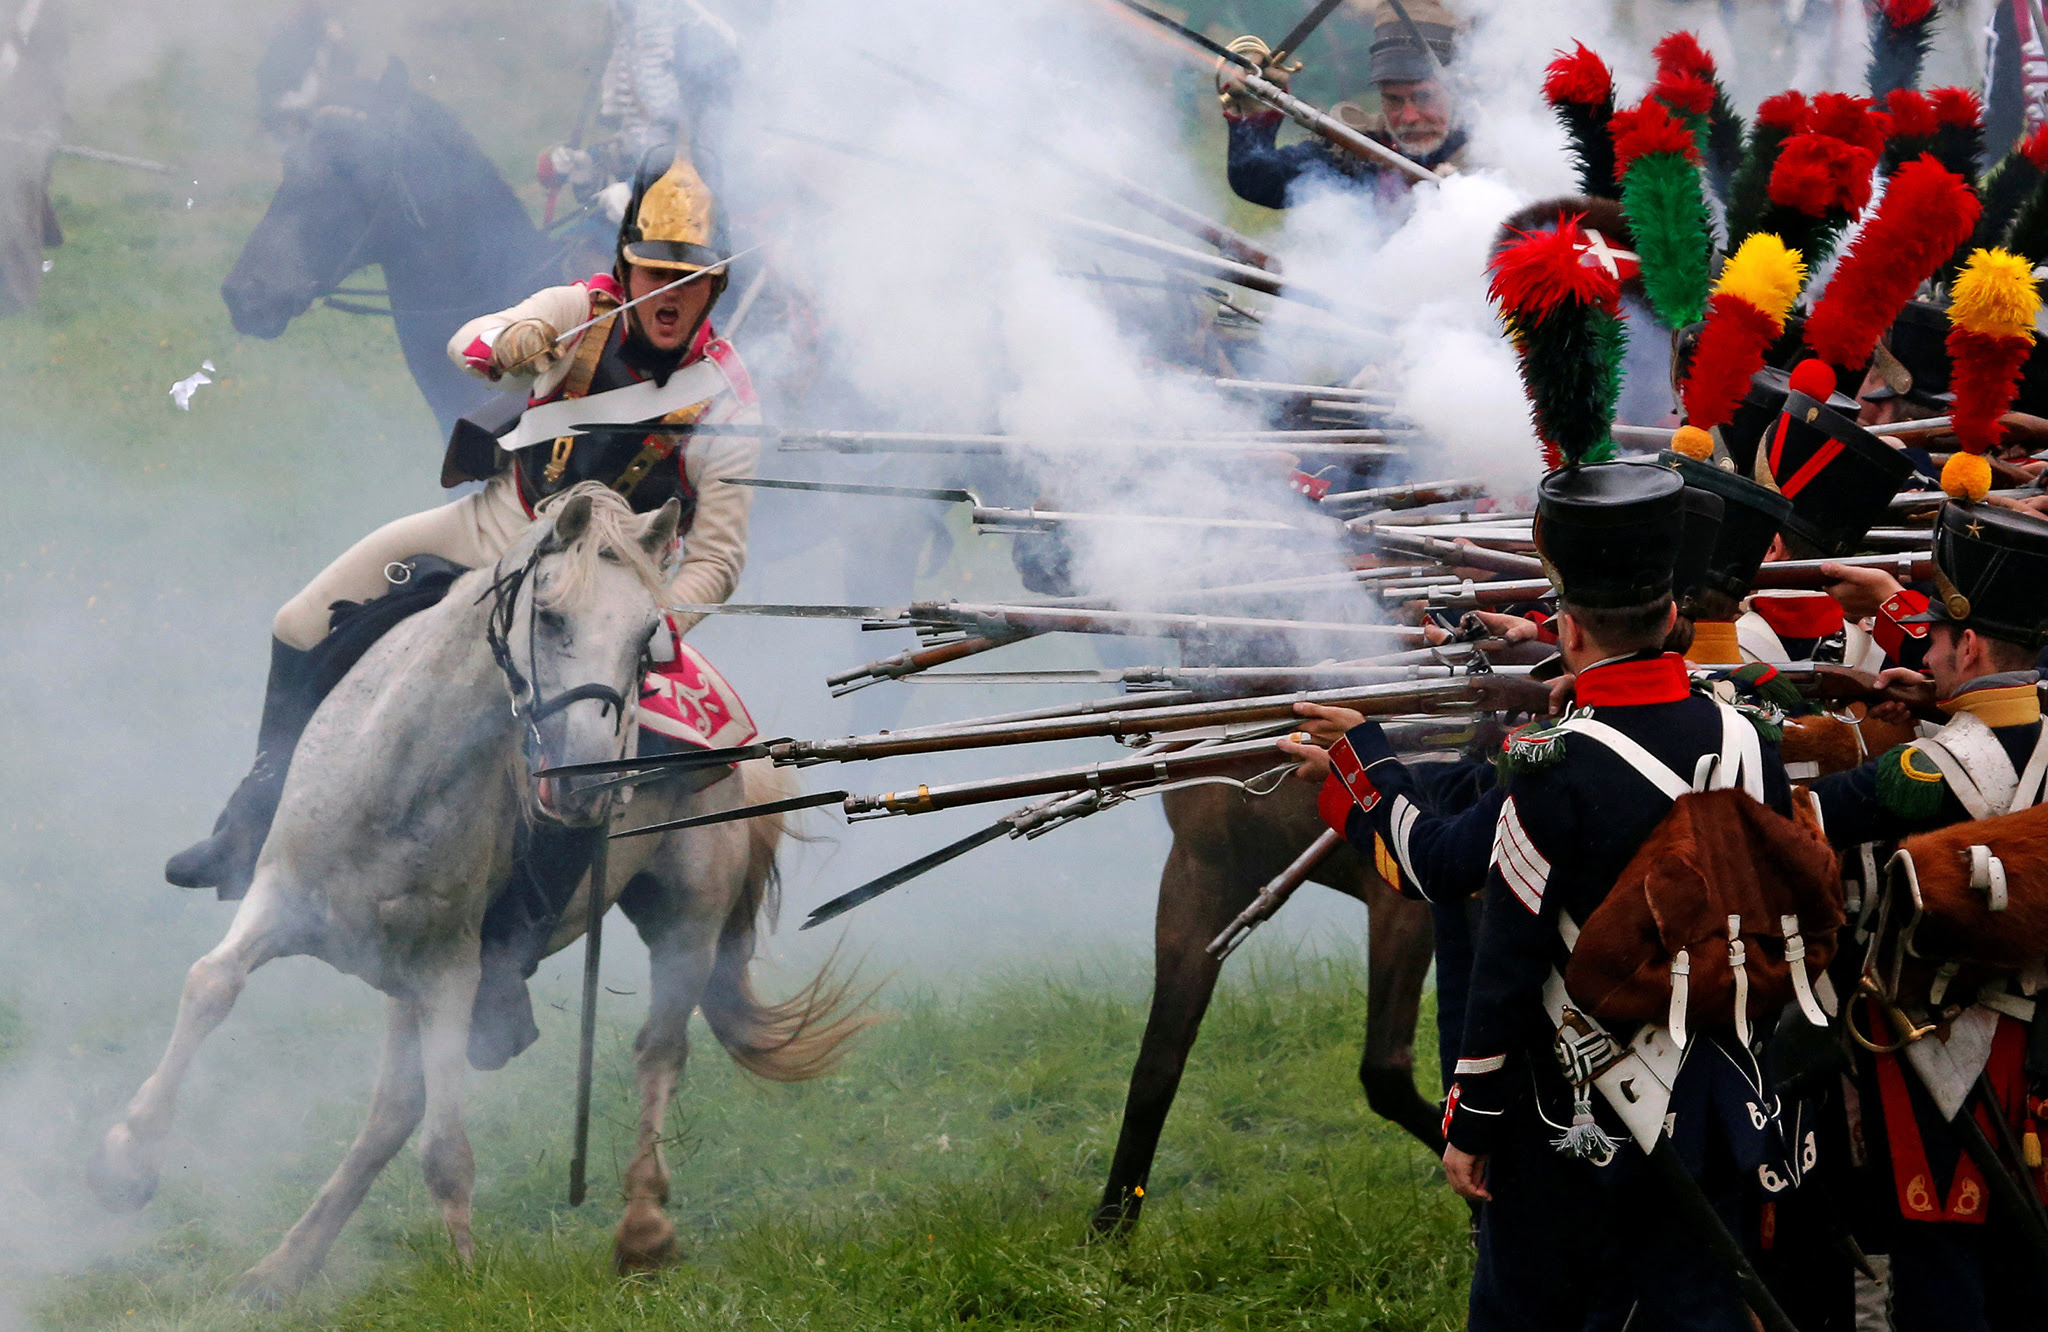 Participants reenact the 1812 Battle of Borodino between Russia and the invading French army during anniversary celebrations near Moscow, Russia